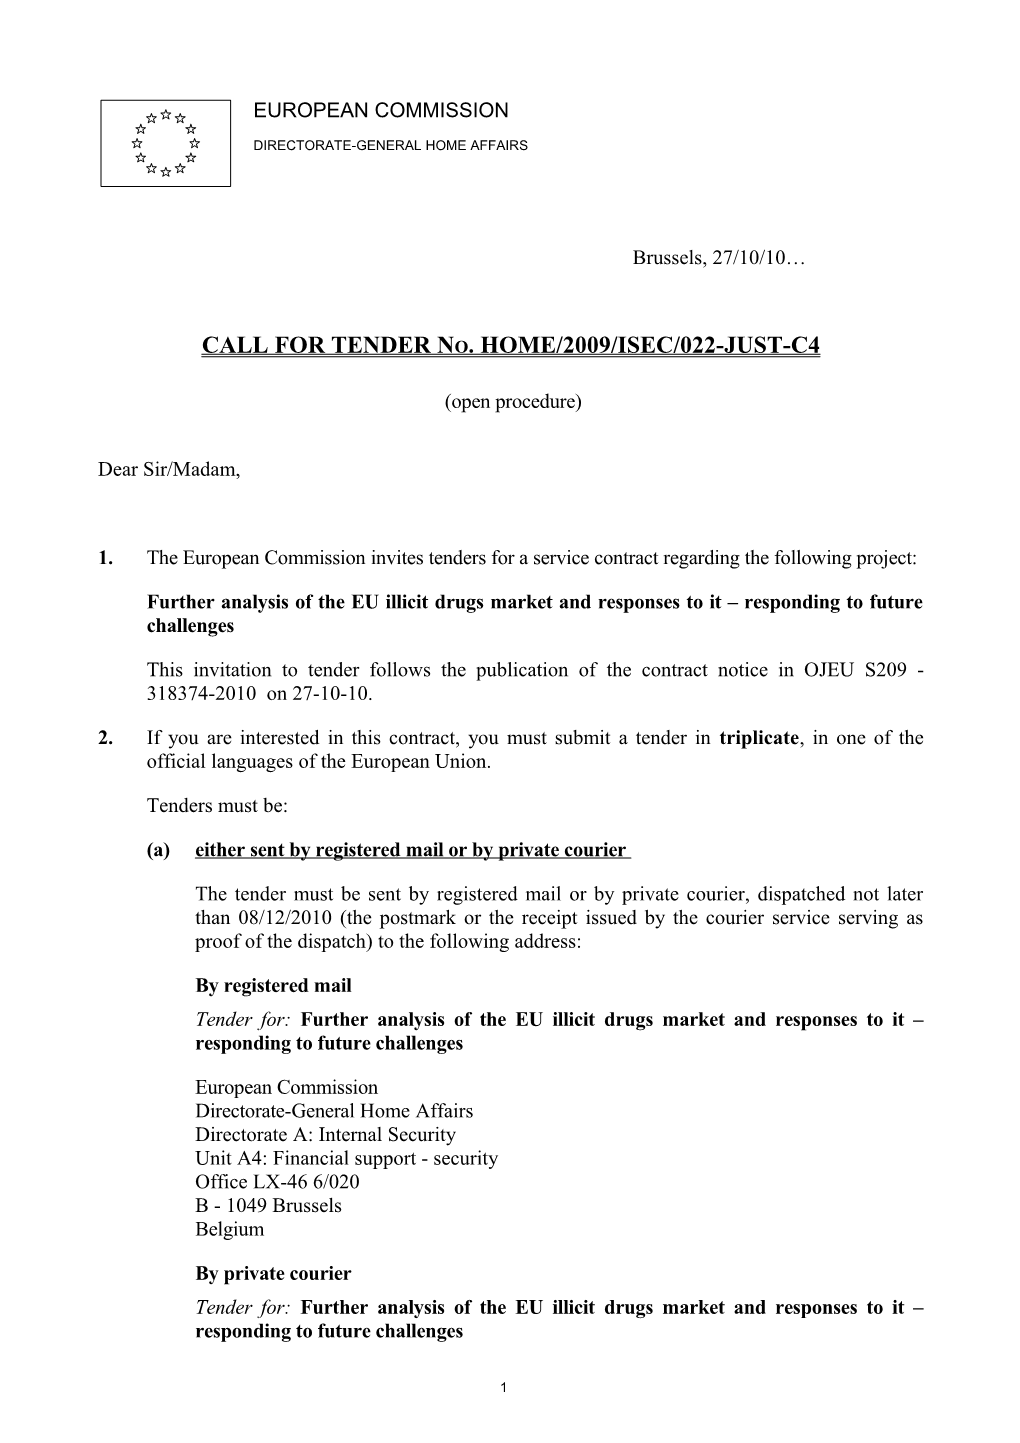 CALL for TENDER No. HOME/2009/ISEC/022-JUST-C4